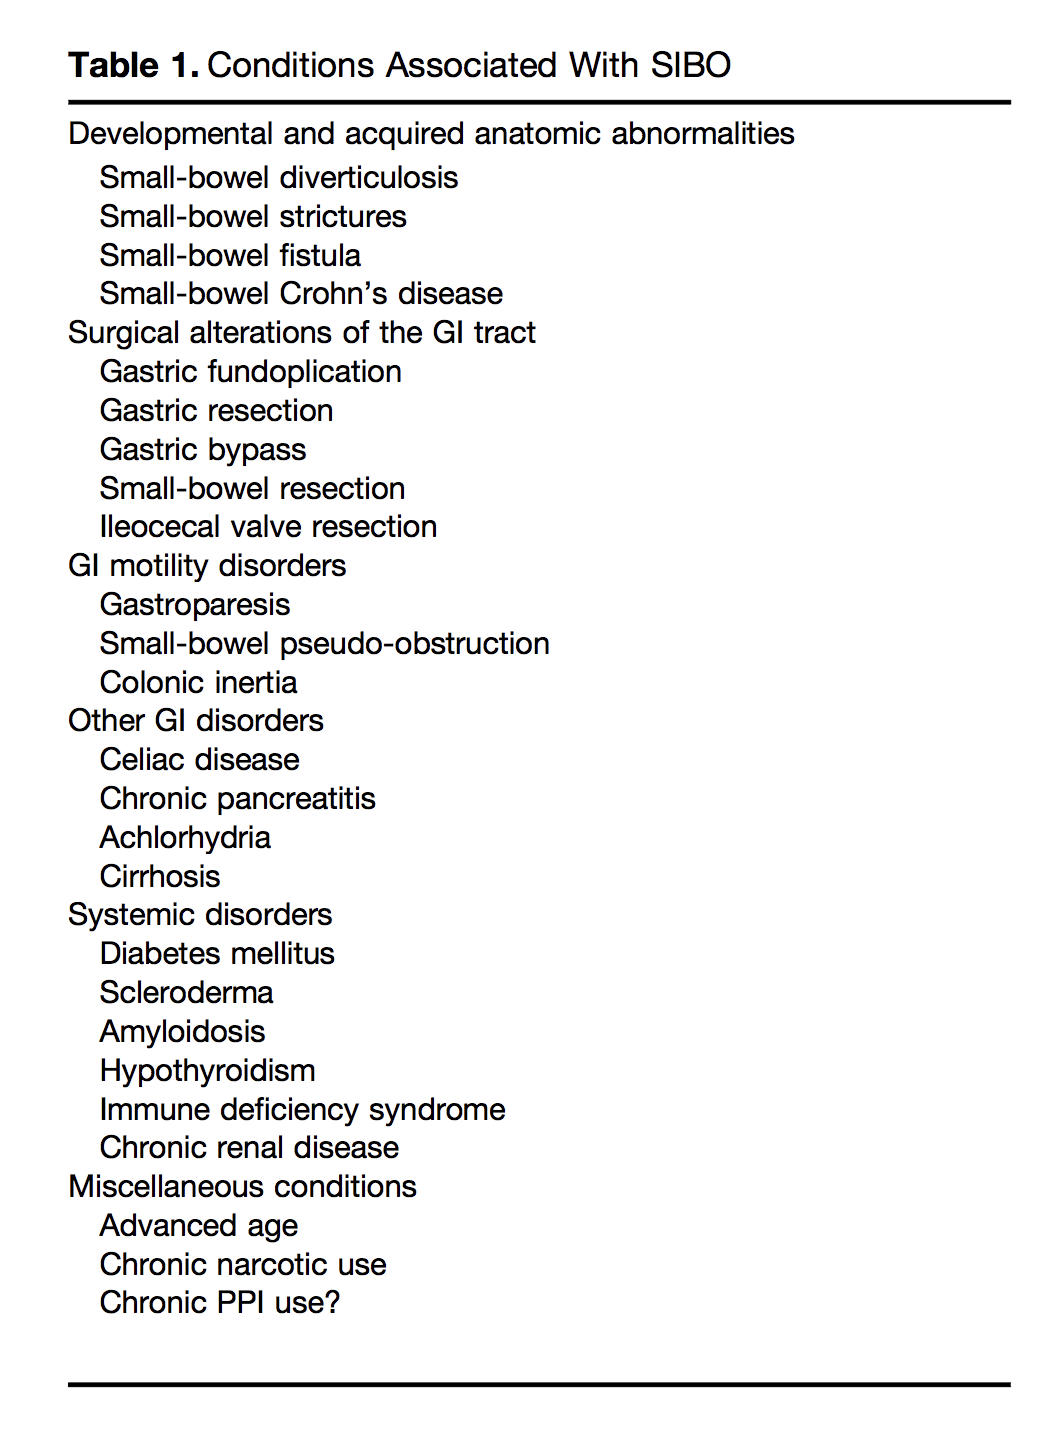 Image taken from: Breath Testing for Small Intestinal Bacterial Overgrowth: Maximizing Test Accuracy outlining some of the conditions associated with small intestinal bacterial overgrowth. 